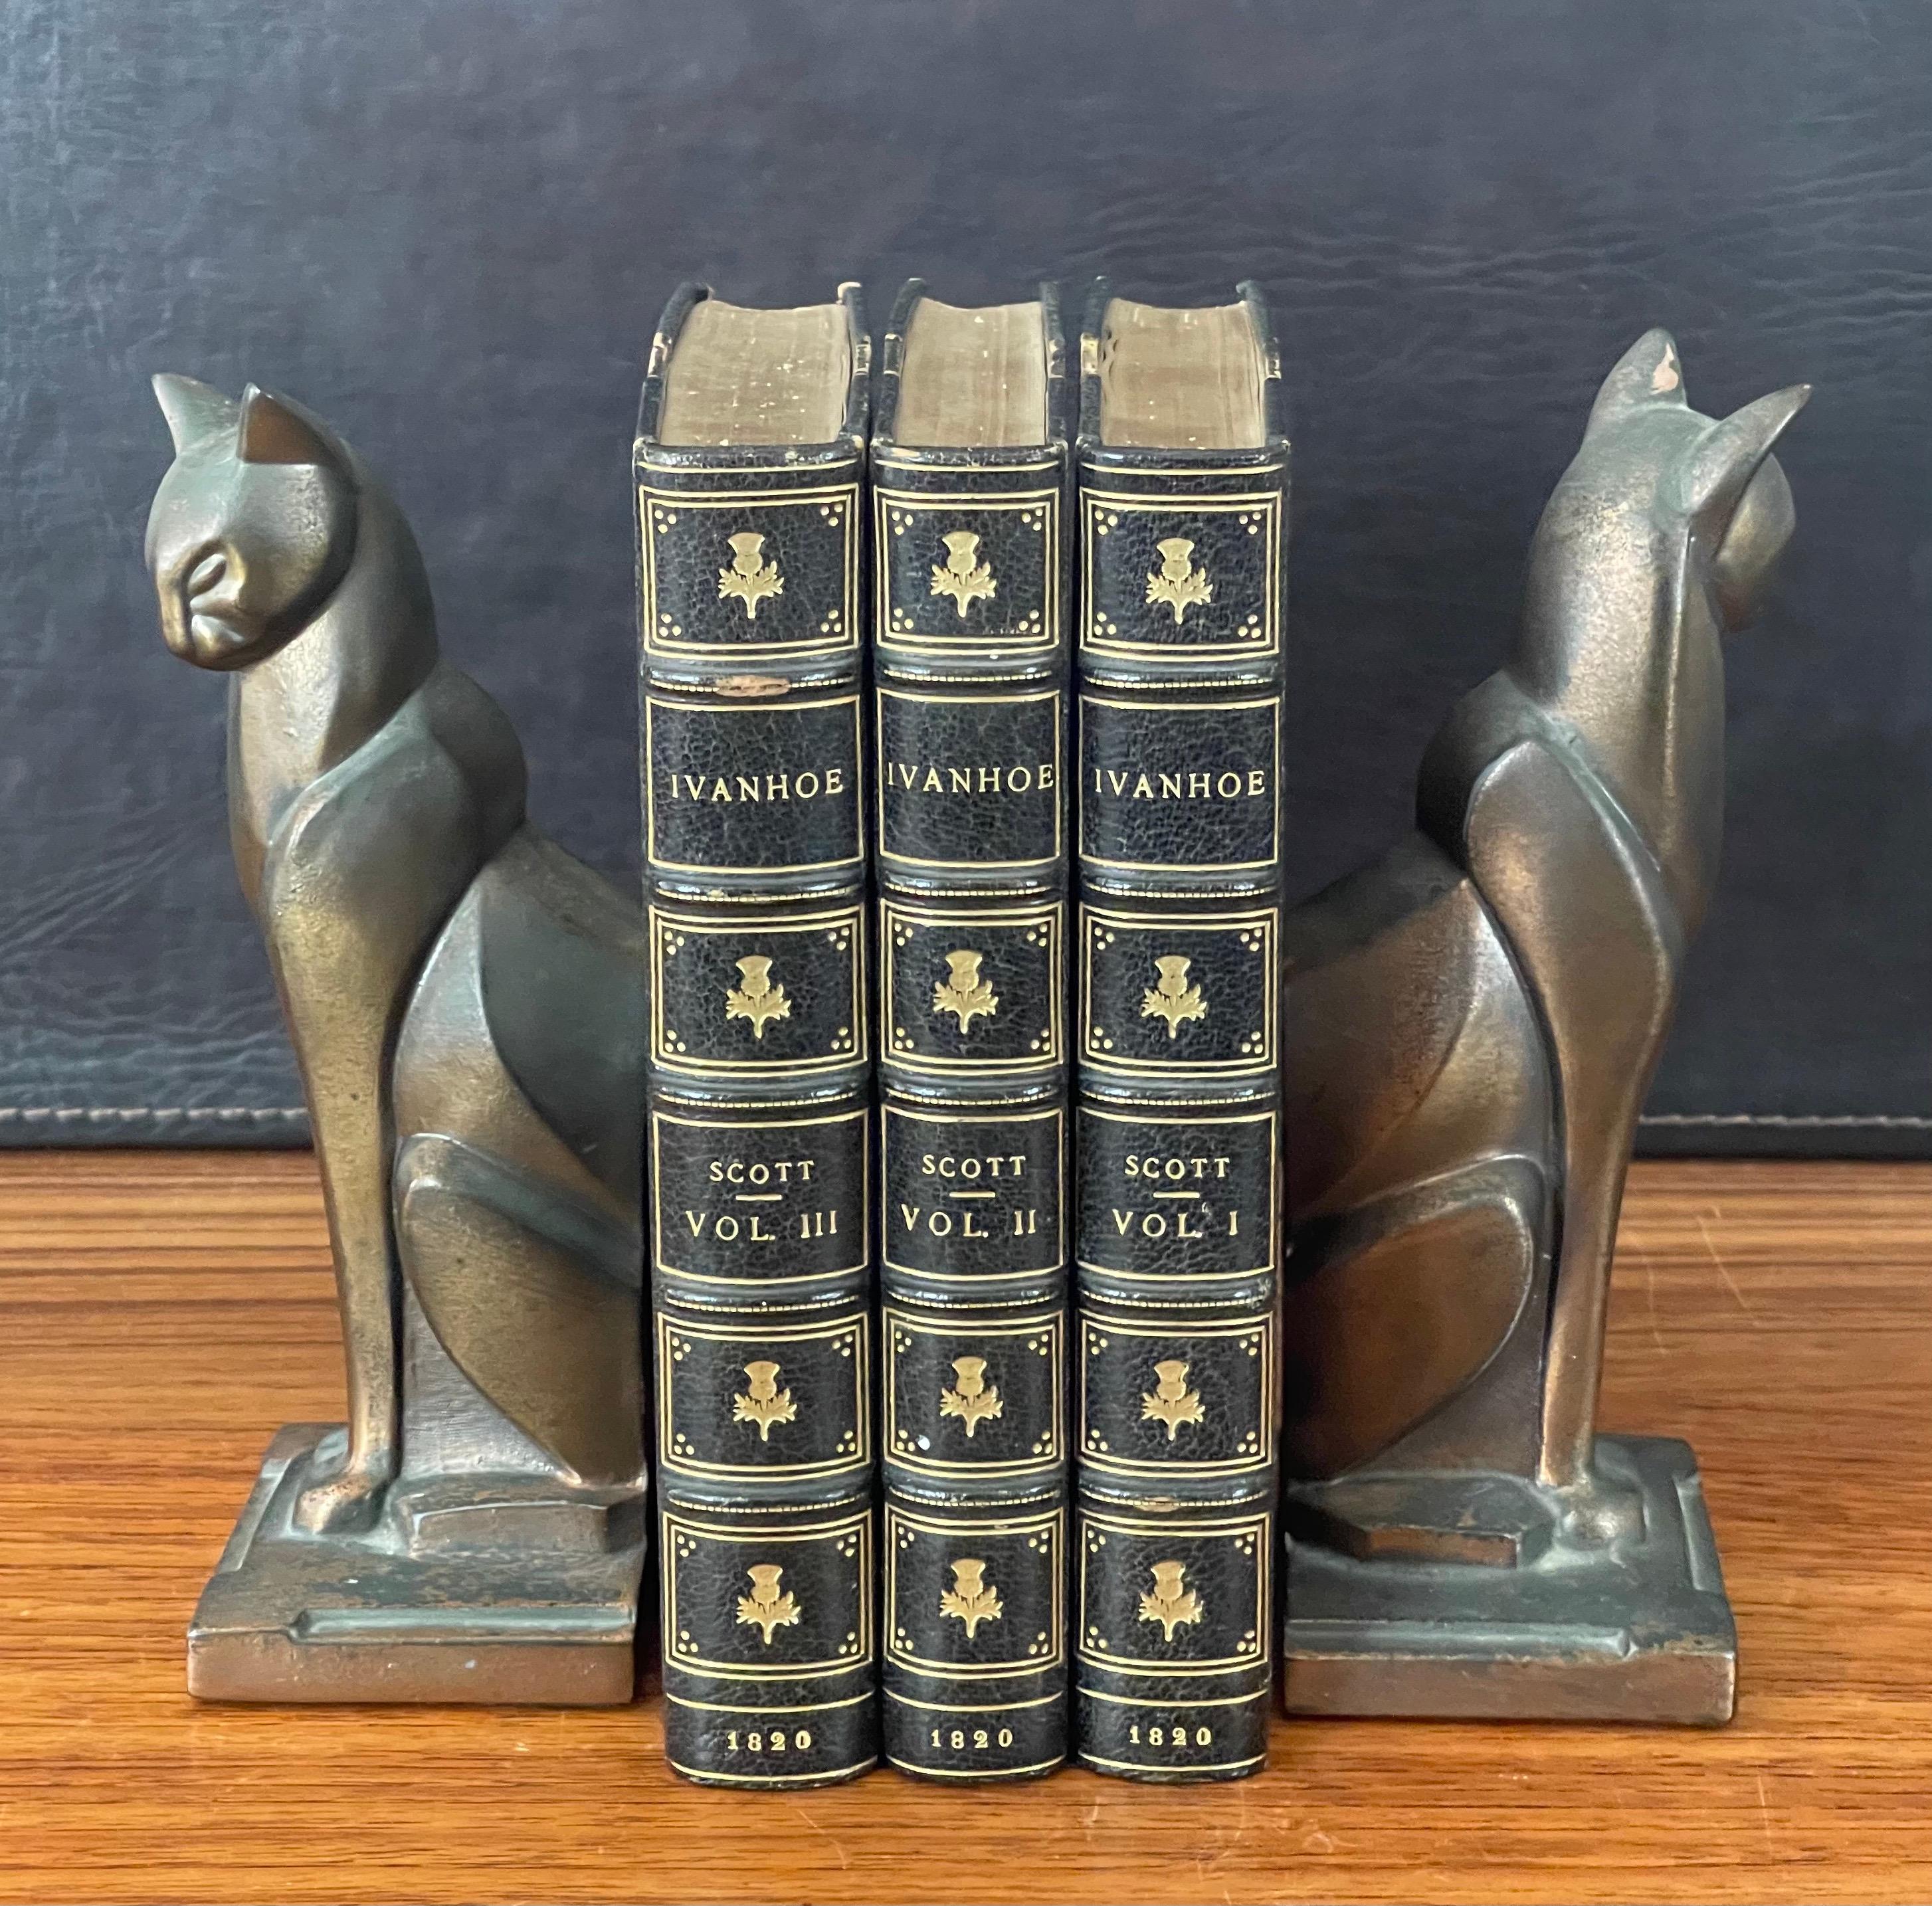 Gorgeous pair of bronze tone Siamese cat Art Deco bookends by Frankart, circa 1930s. They are in original condition with a fine patina, some light oxidation and some surface scratches; the pair measures 5.25